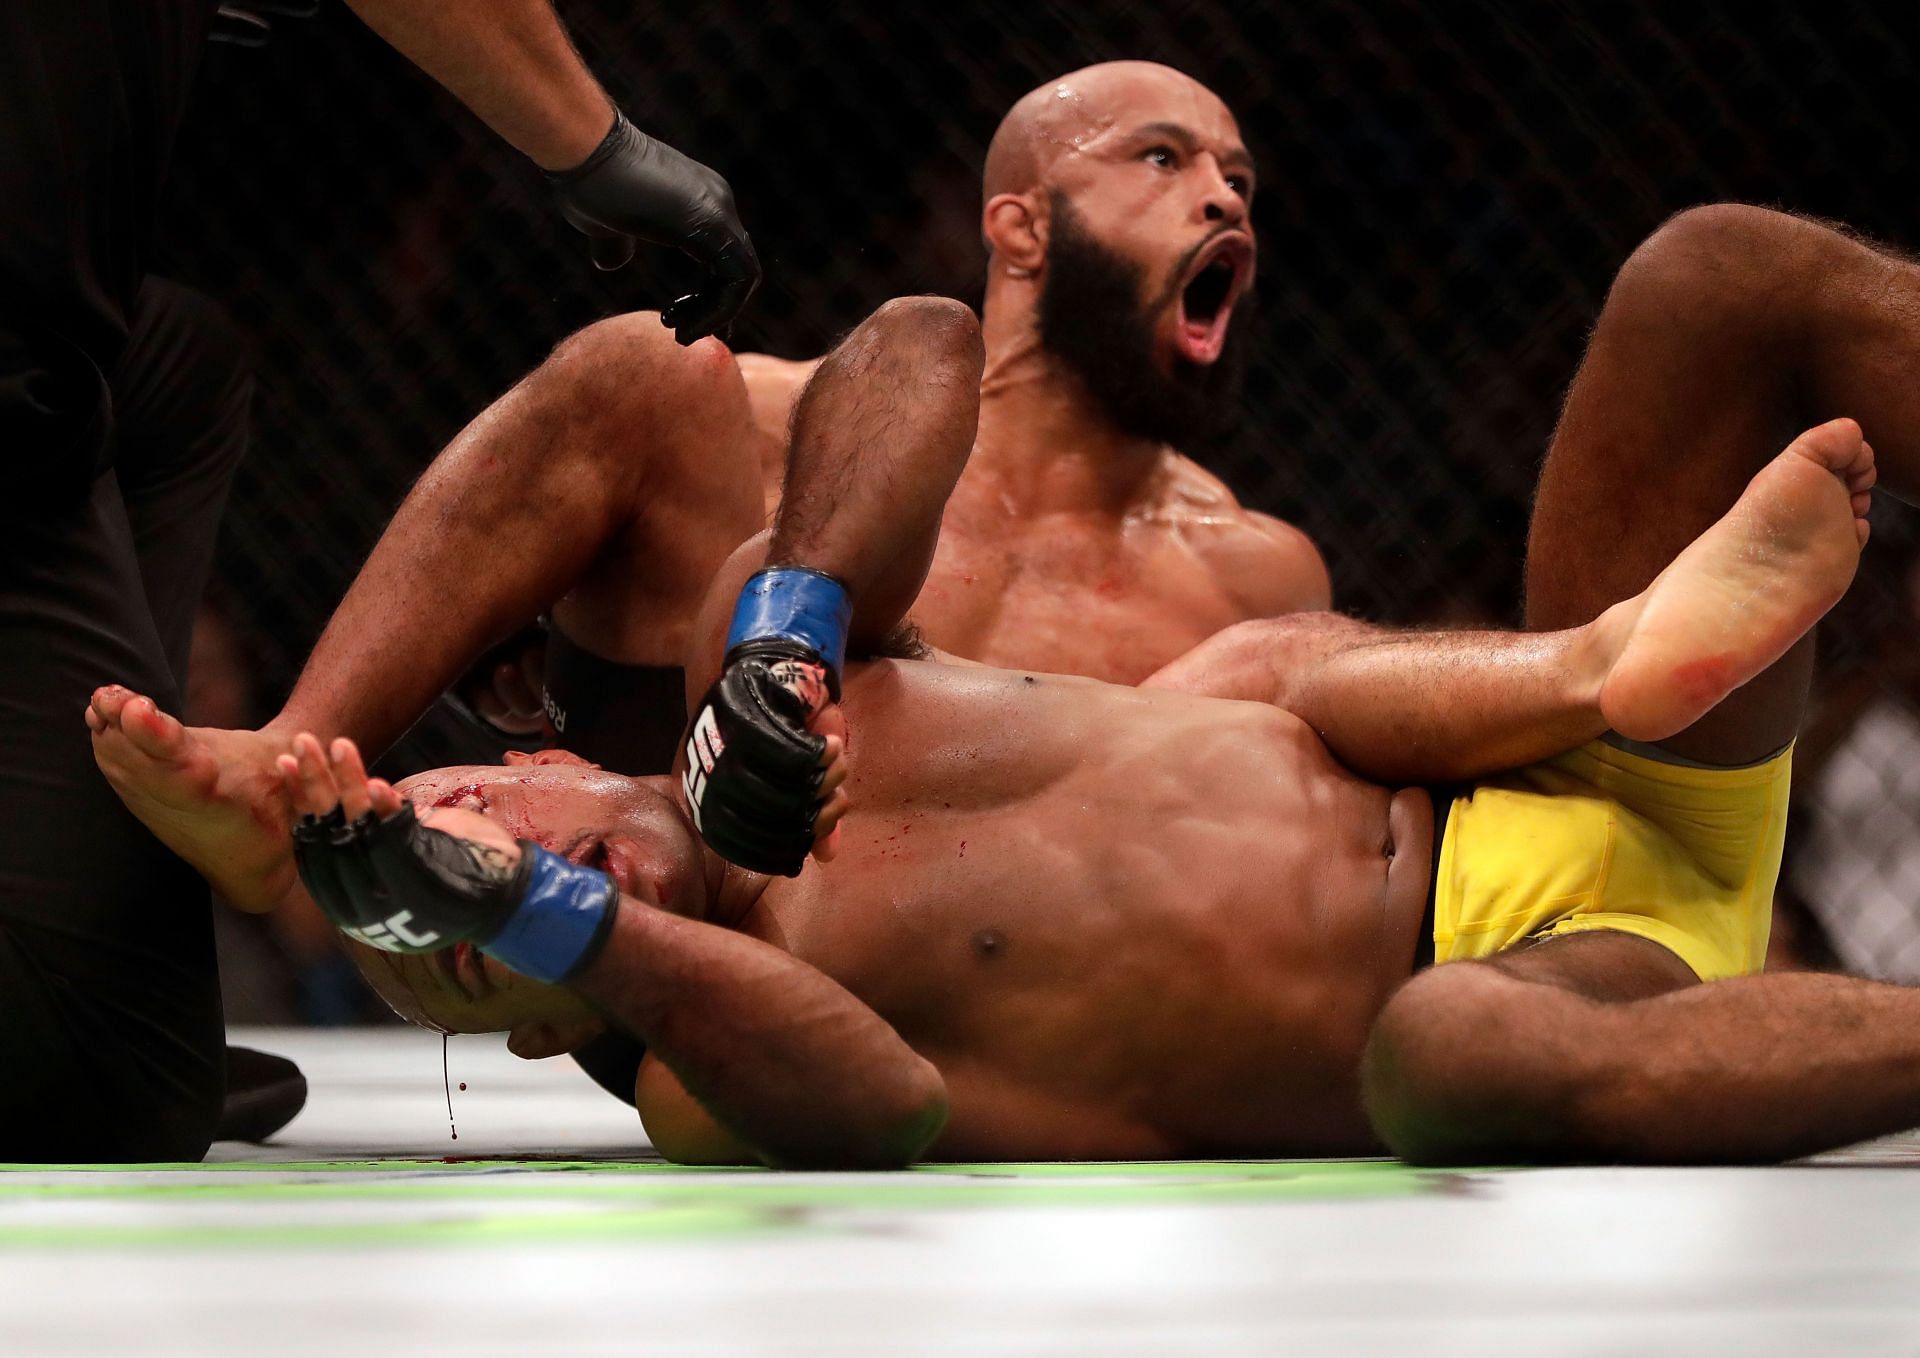 Demetrious Johnson is now 1-0 in special rules fights